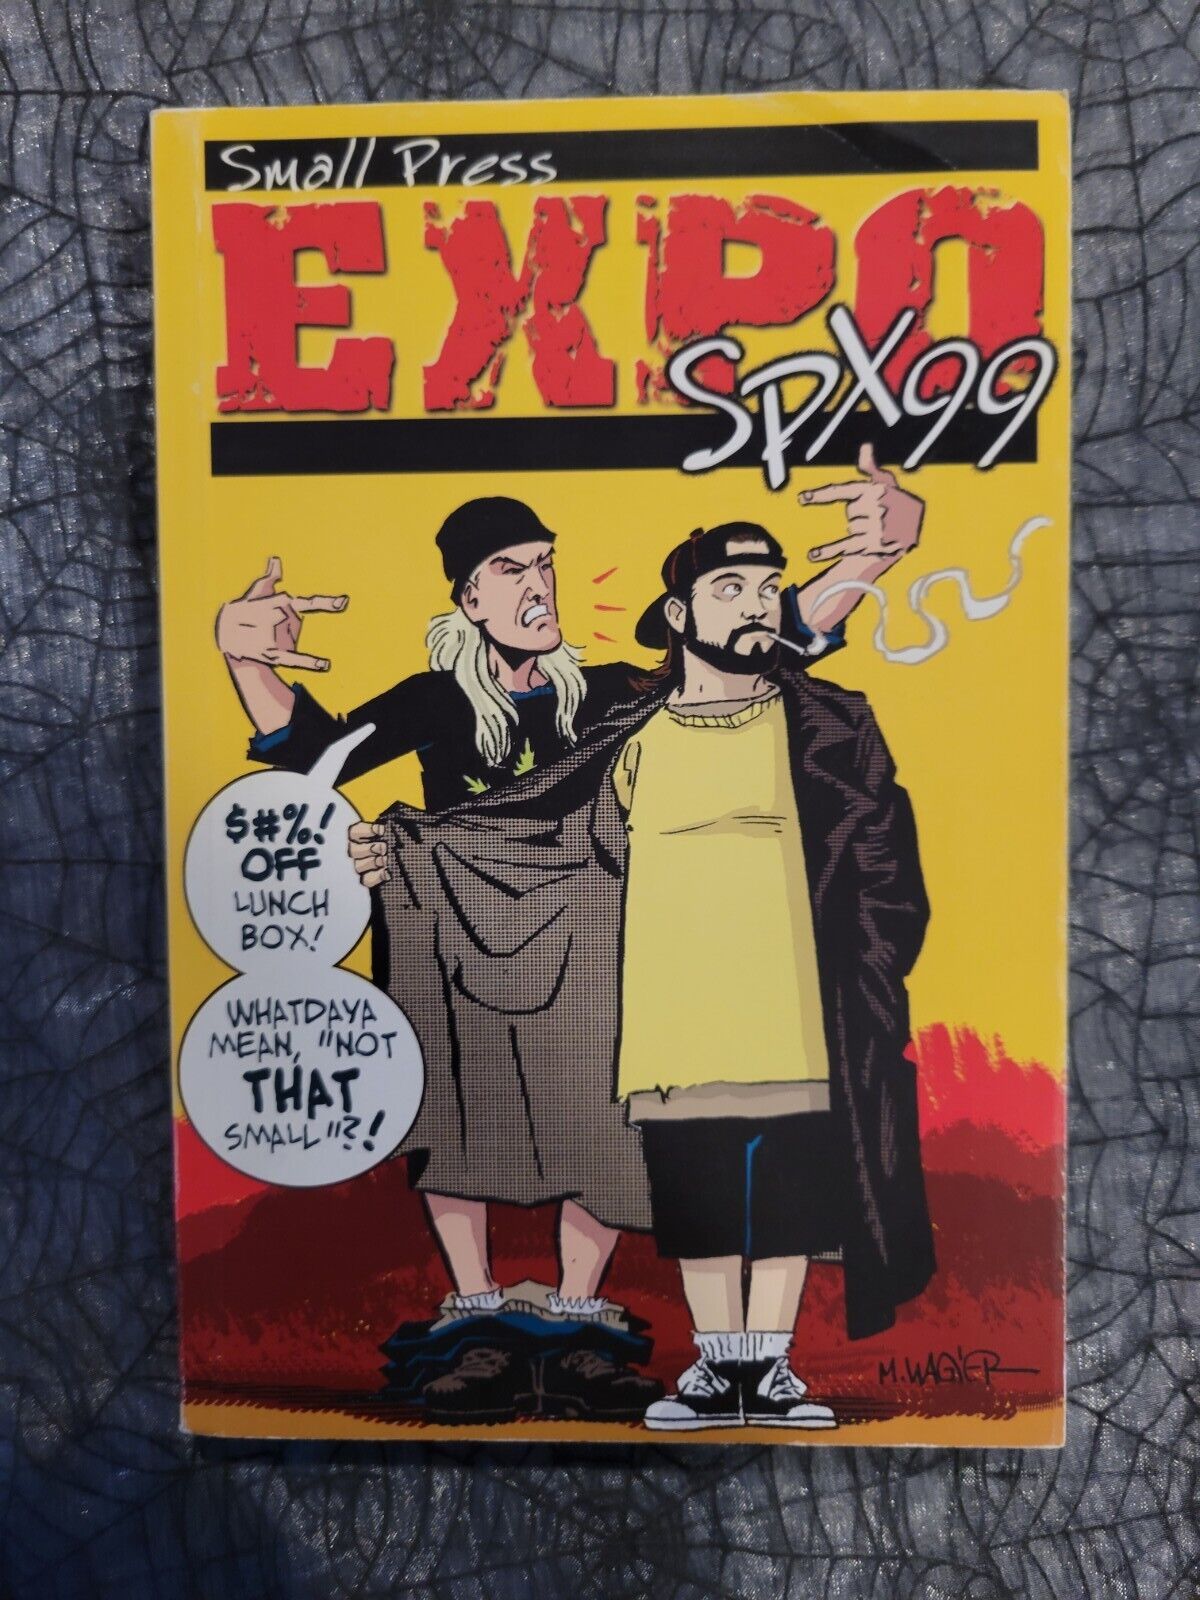 Expo 1999 Spx99 Comic Kevin Smith Jay And Silent Bob Cover